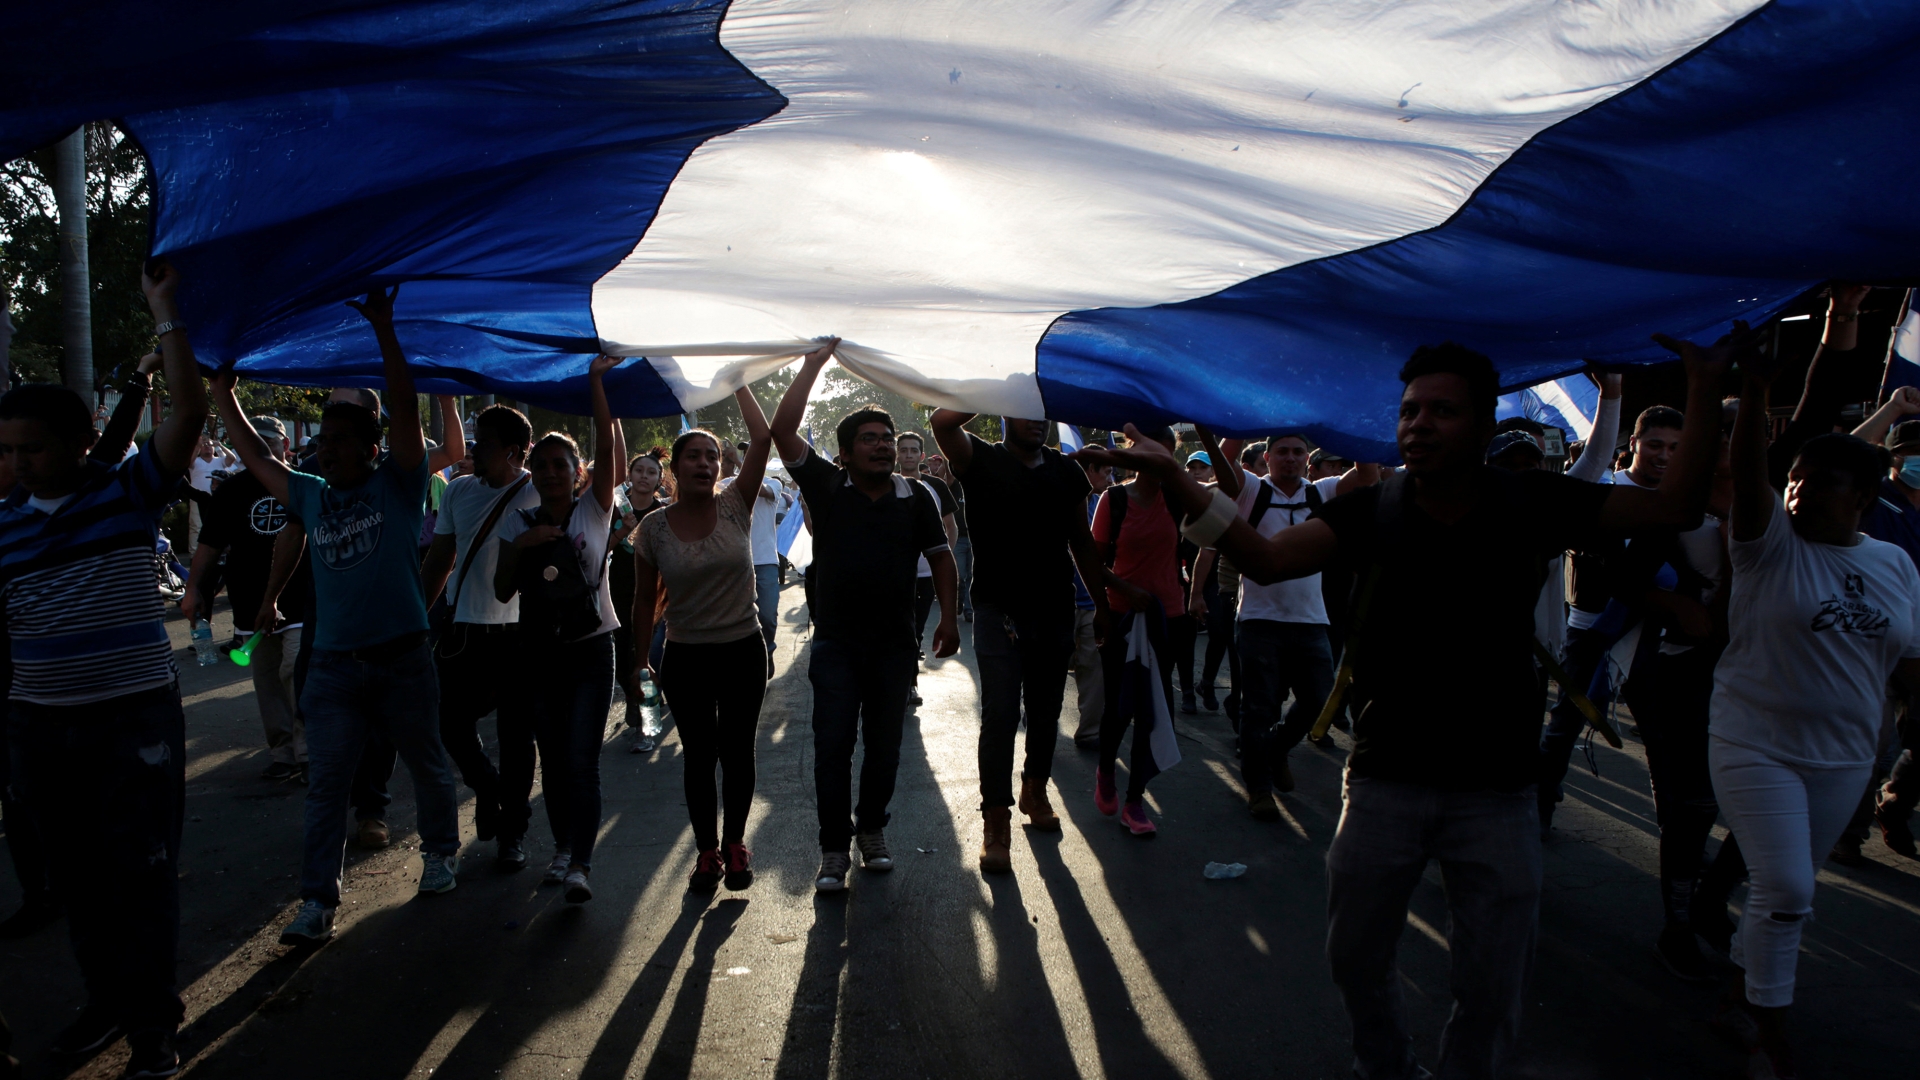 Unrest Continues In Nicaragua As Protesters March On - Nicaragua Political Unrest 2018 , HD Wallpaper & Backgrounds